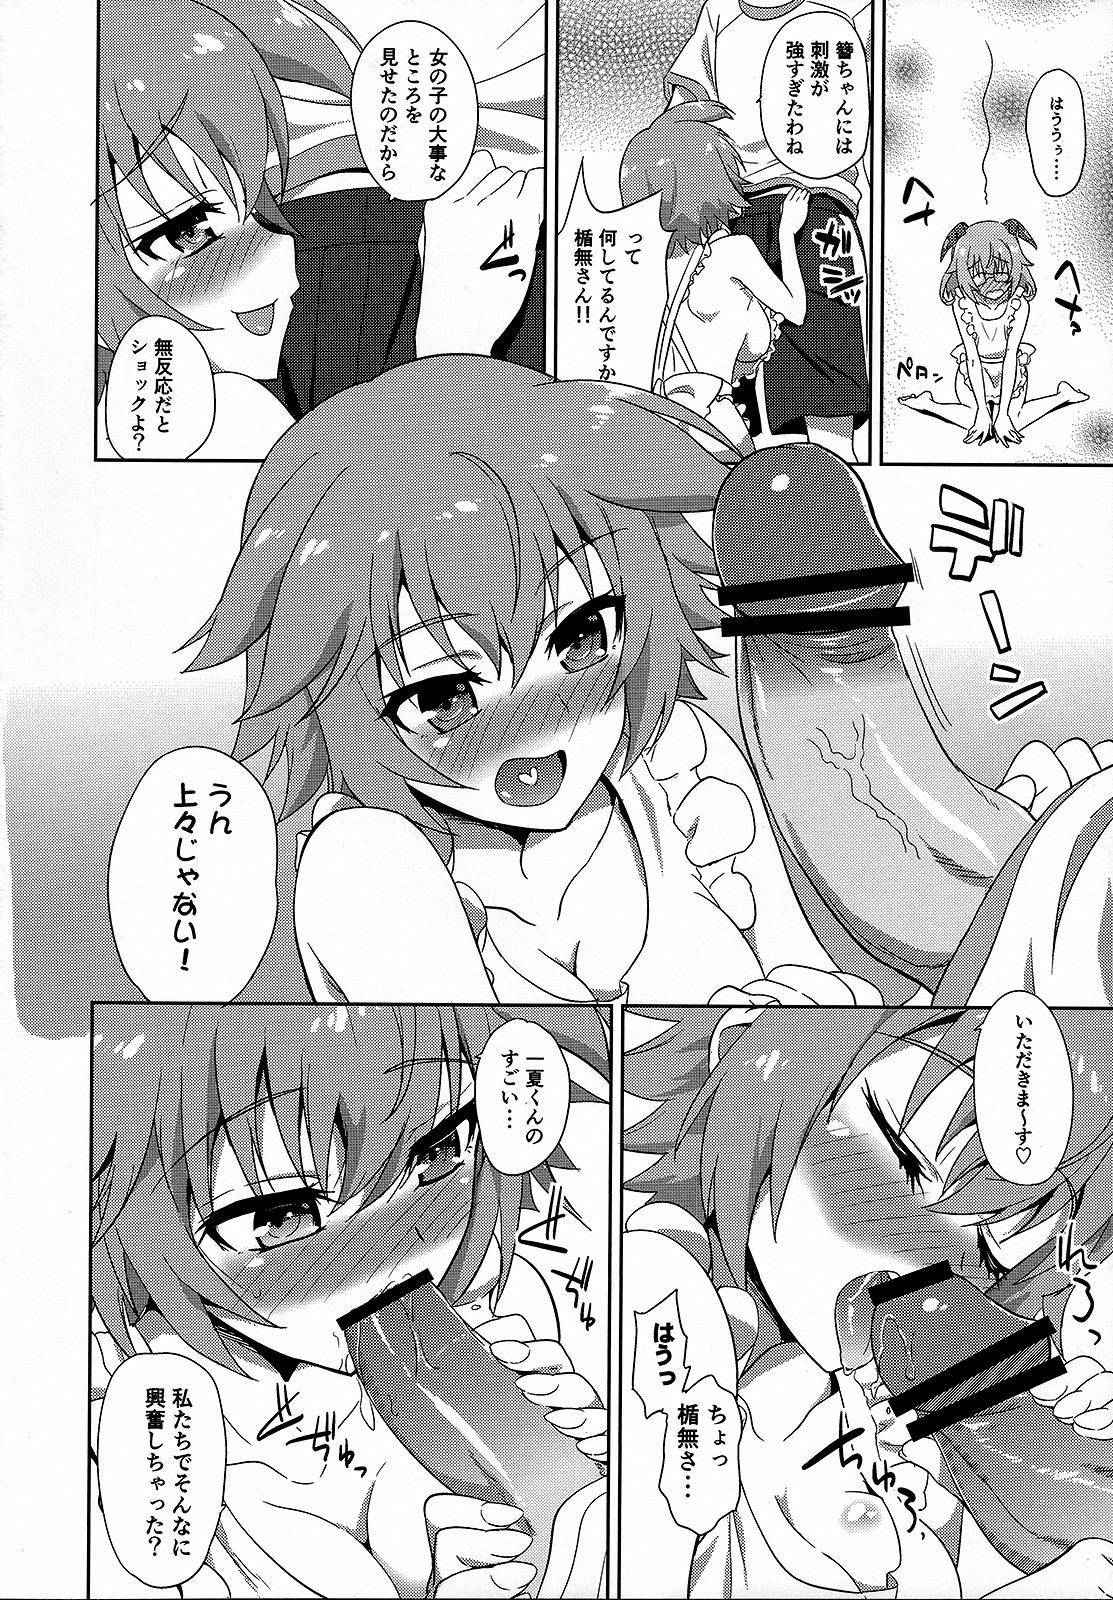 Amature Porn IS ICHIKA LOVE SISTERS!! - Infinite stratos Teen Blowjob - Page 5